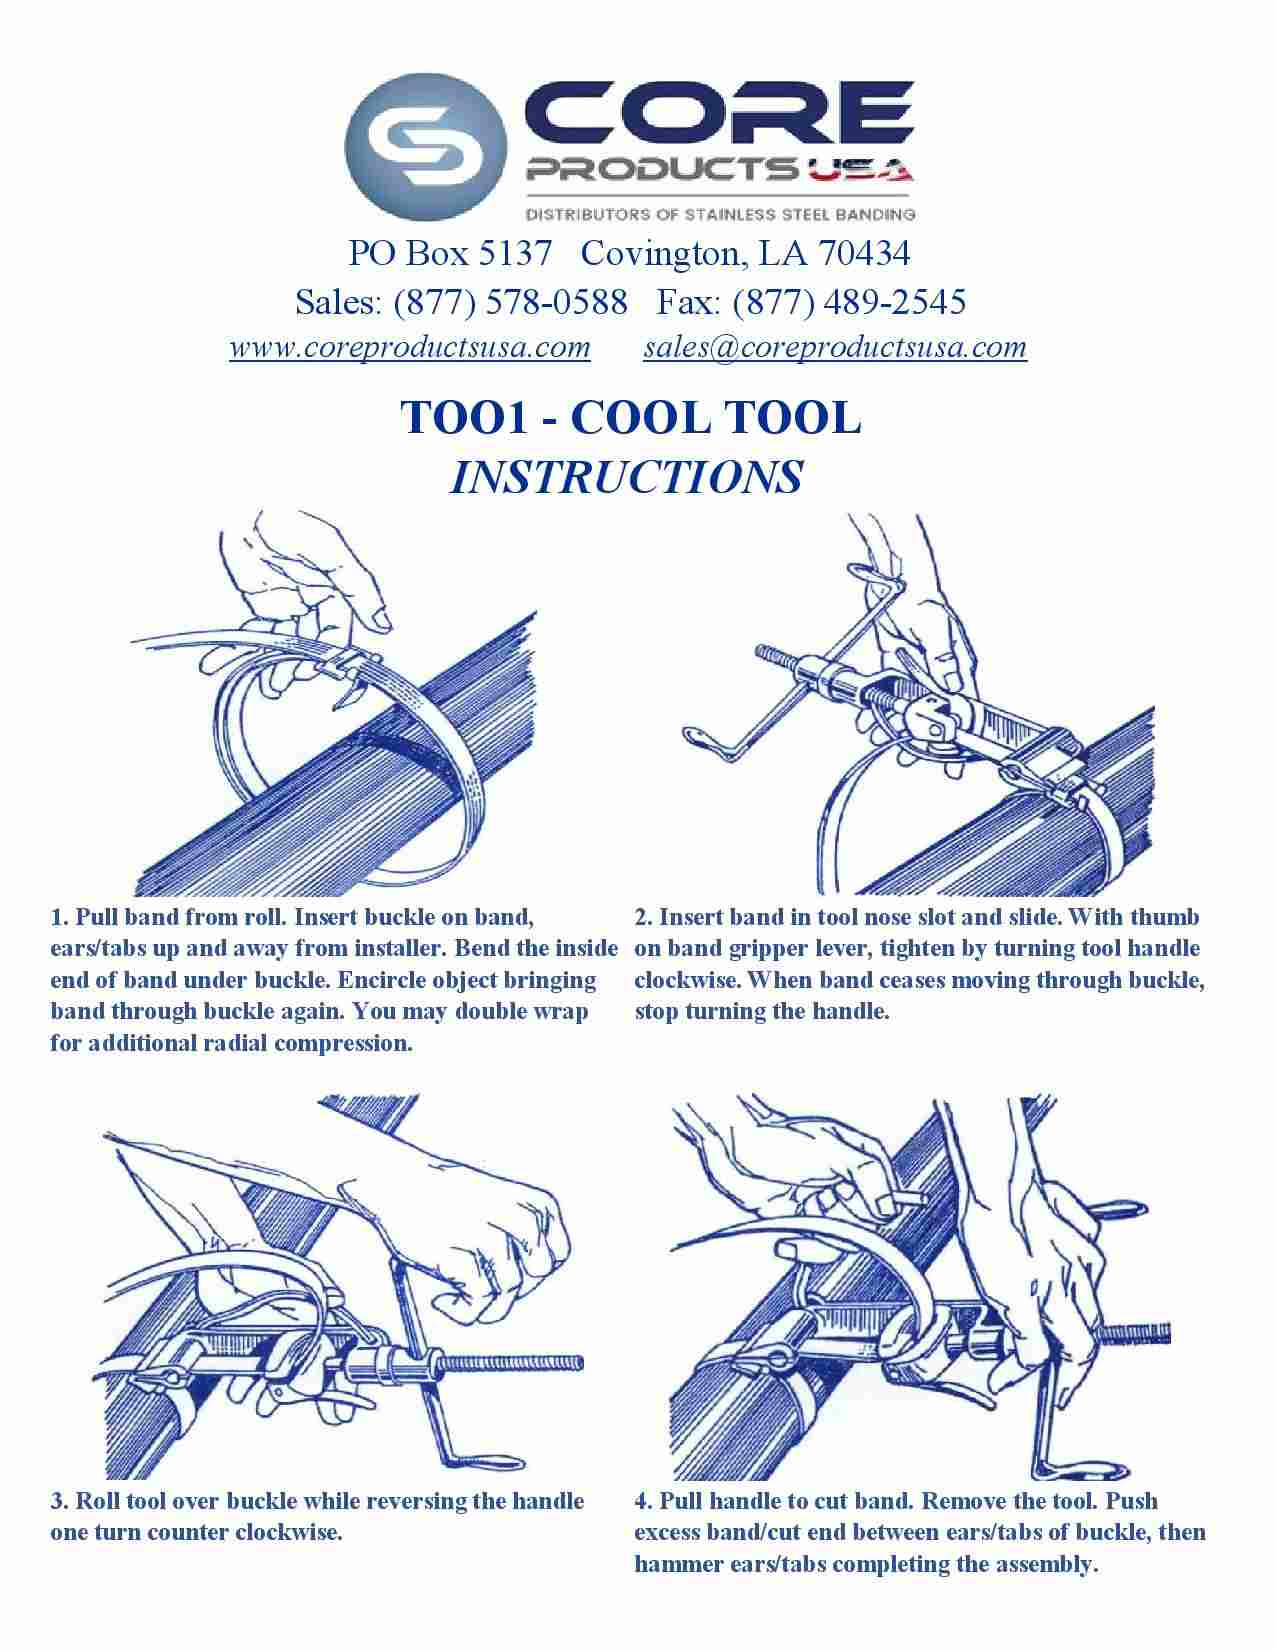 T001cool-tool-instruction-manual